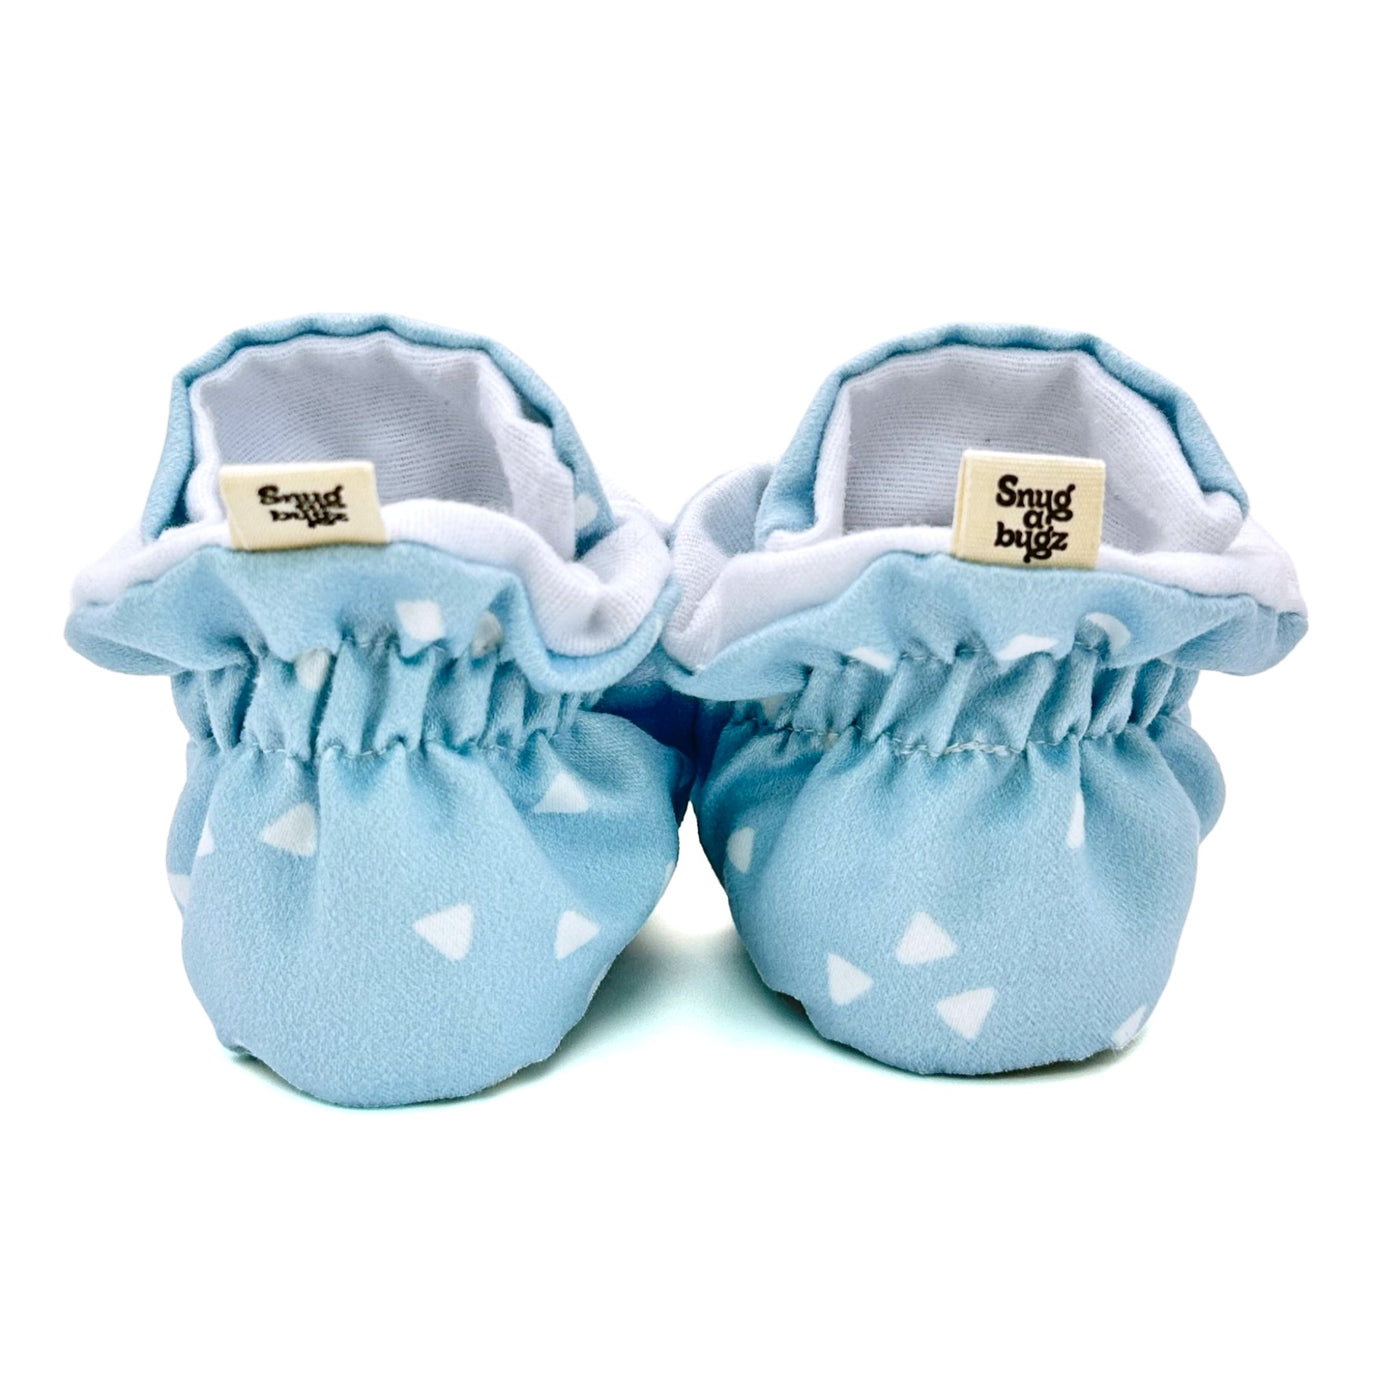 Stay-on baby booties featuring white triangles on a baby blue background print, with non-slip soles and adjustable three snap closure. Made from organic cotton.